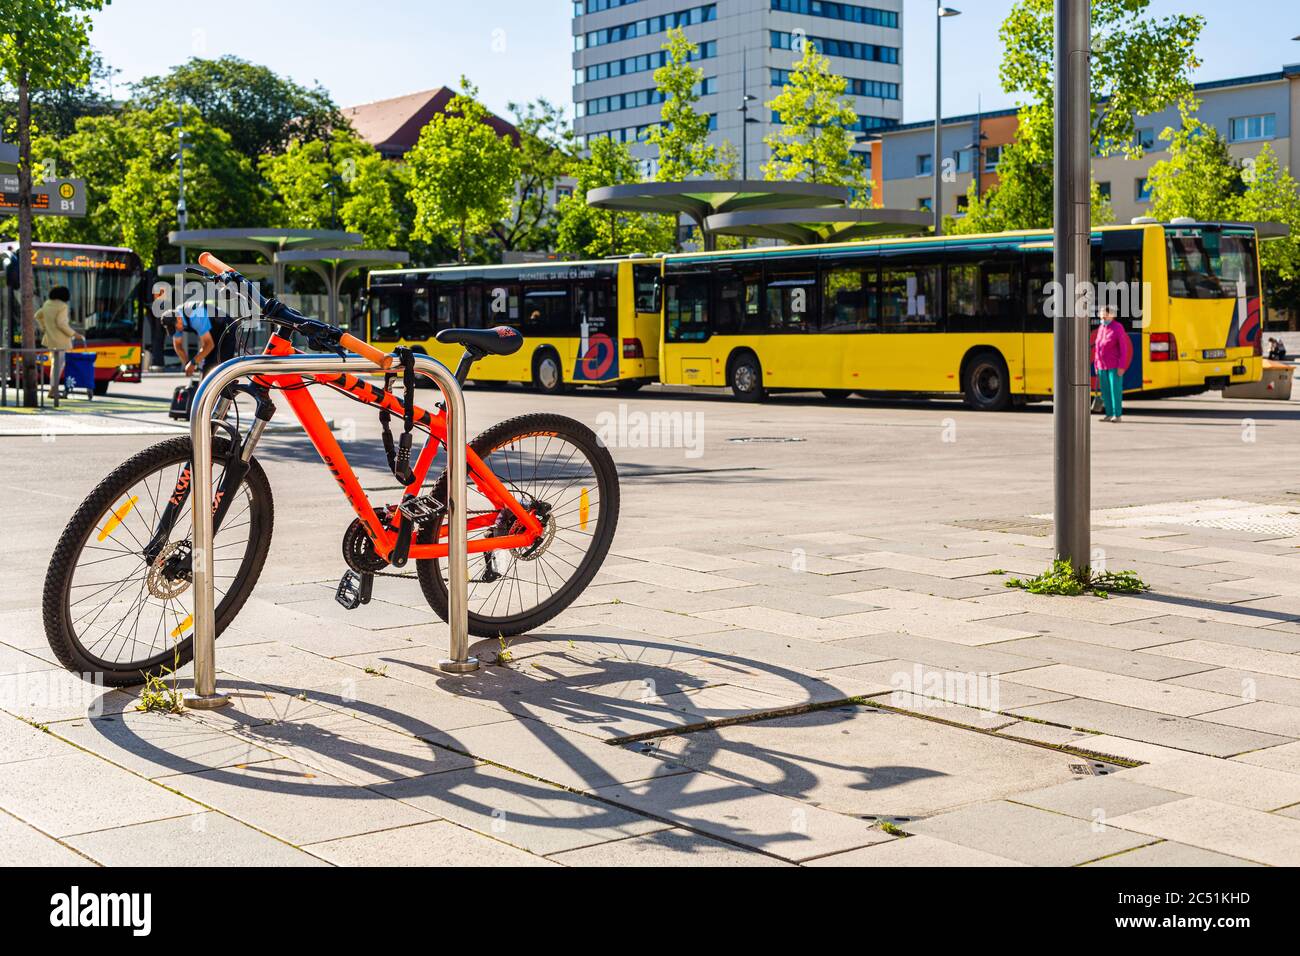 Yellow buses. Public transport in Germany. Last station. Summer in city. Parked buses. Stock Photo